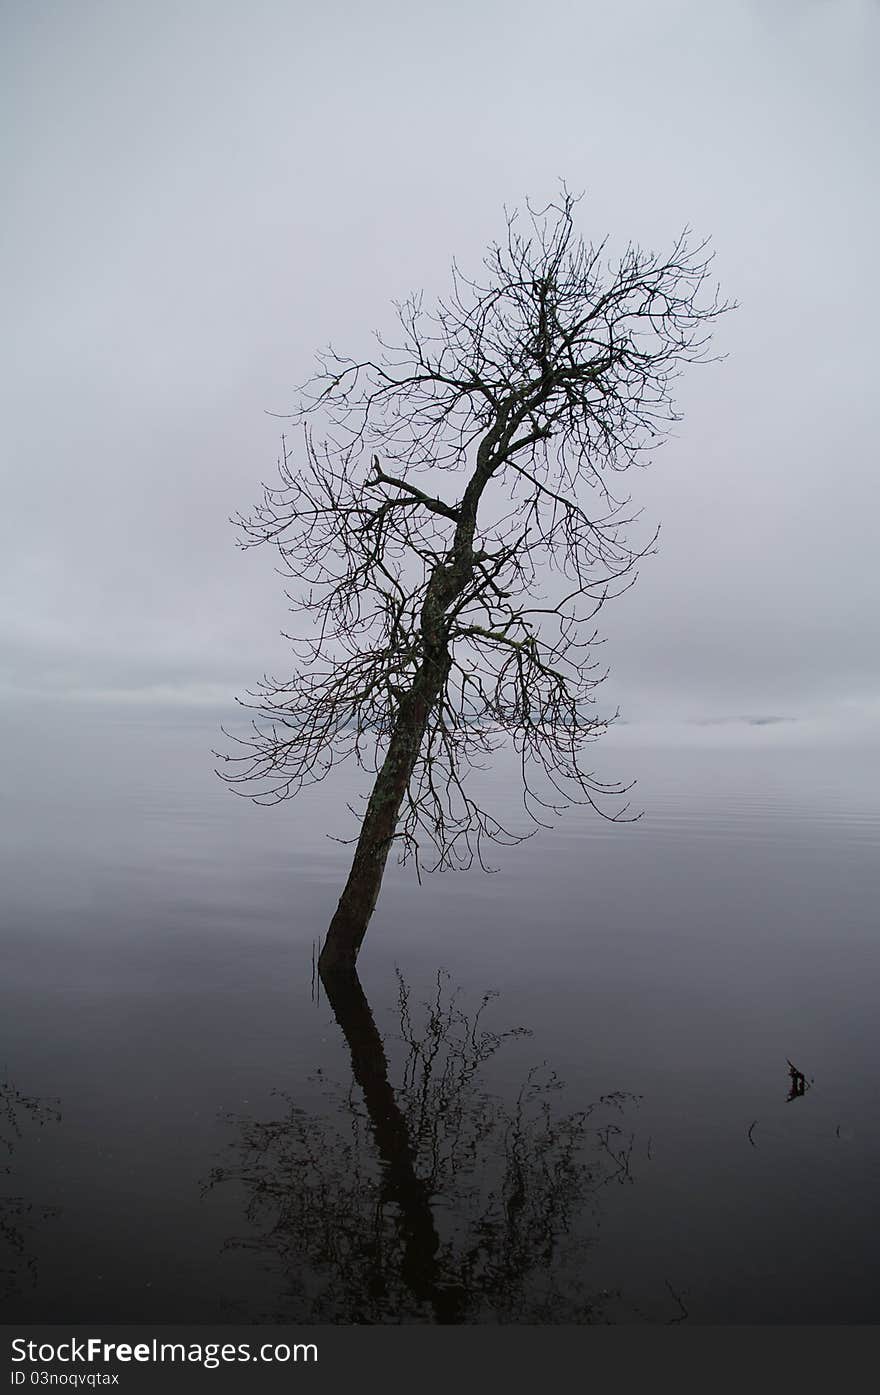 A Tree surrounded by the flood waters of the Saint John River. A Tree surrounded by the flood waters of the Saint John River